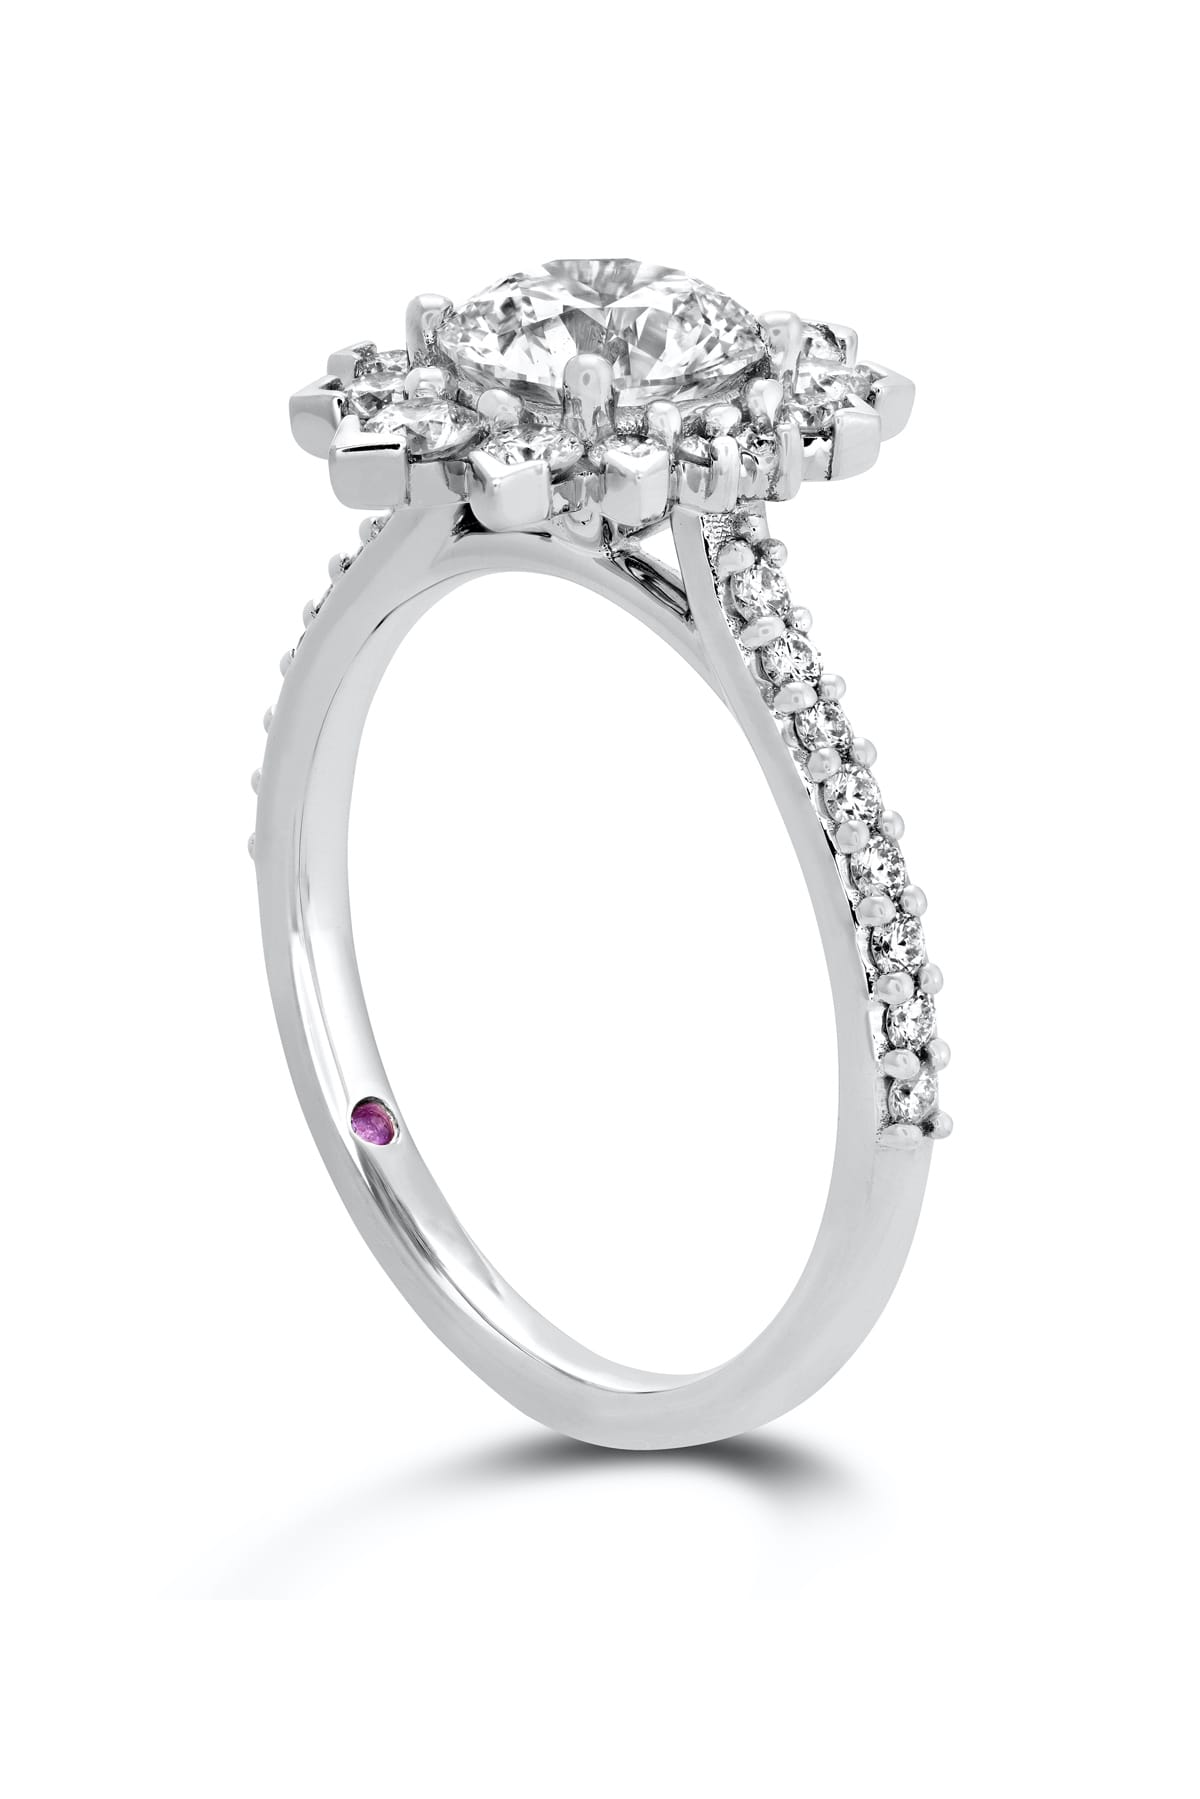 Behati Say It Your Way Oval Engagement Ring From Hearts On Fire available at LeGassick Diamonds and Jewellery Gold Coast, Australia.